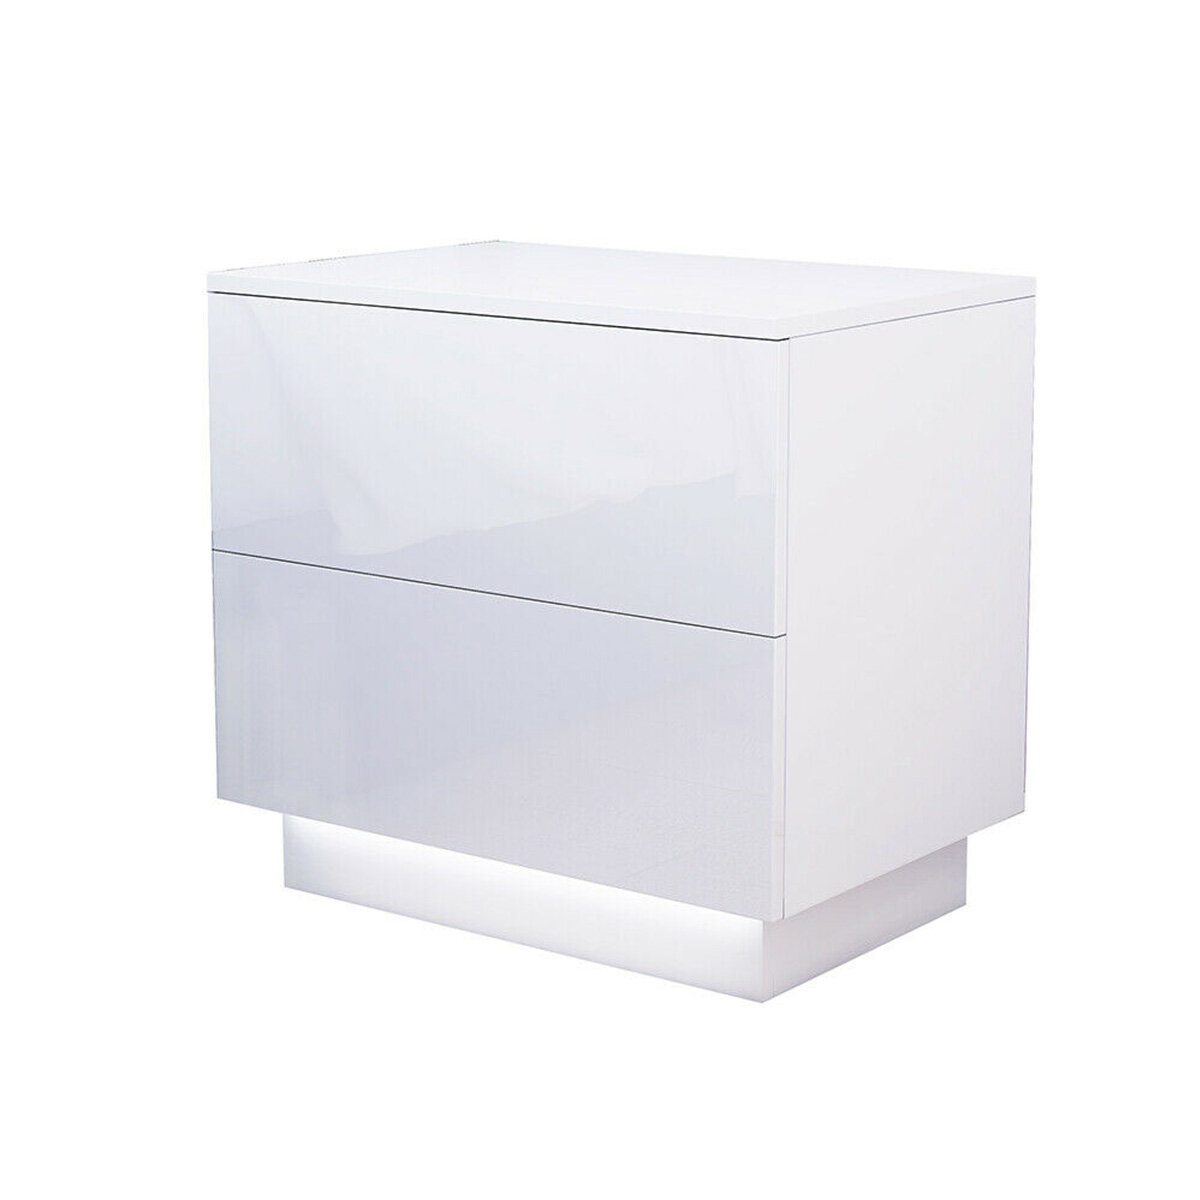 Image of Woodyhome High Gloss LED Nightstand With 2 Drawers Modern Bedside Table File Cabinet Holder Chest Bedroom Office